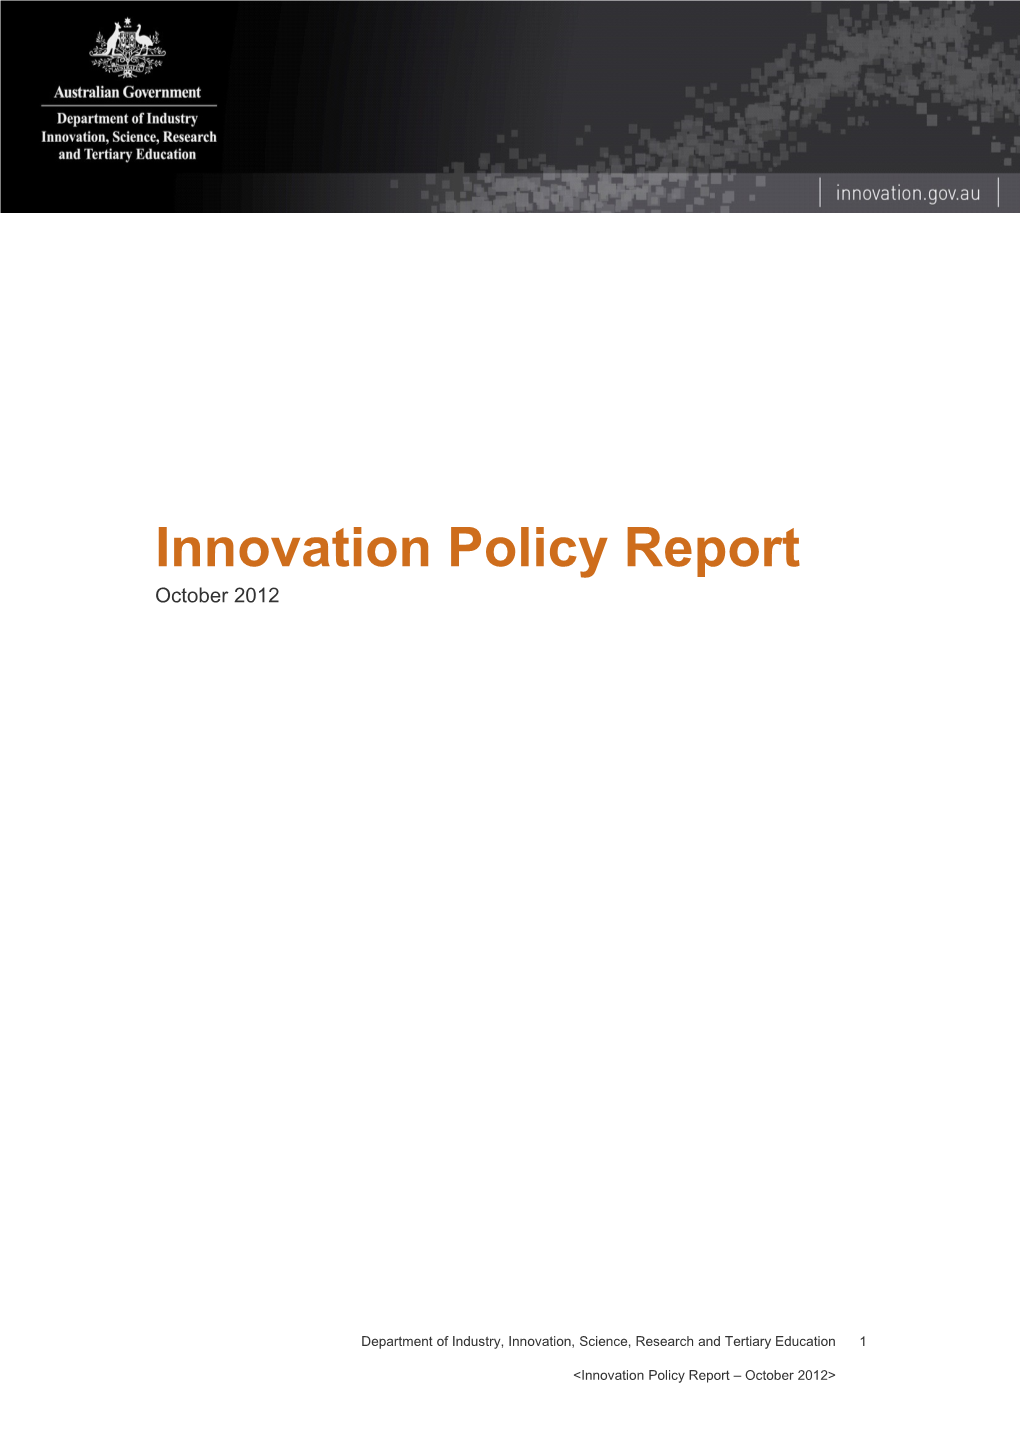 Innovation Policy Report - October 2012